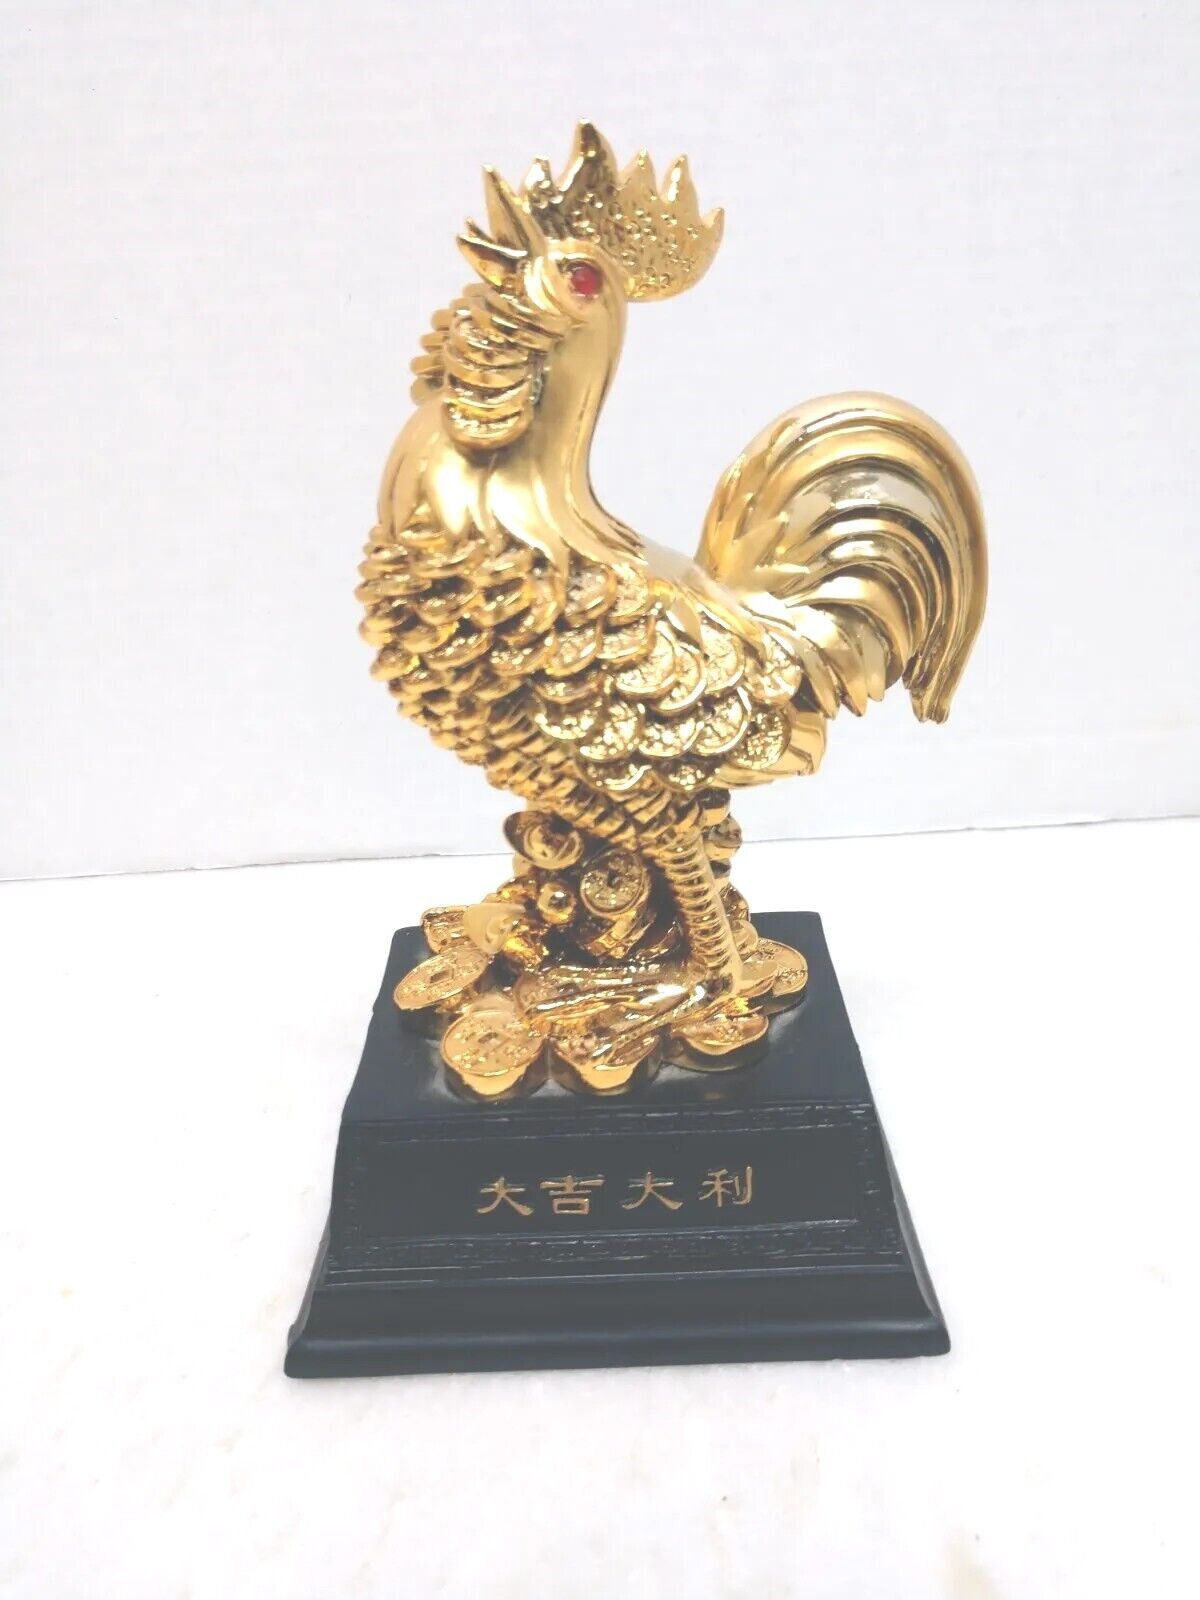 Vintage Chinese Golden Rooster Prosperity Statue